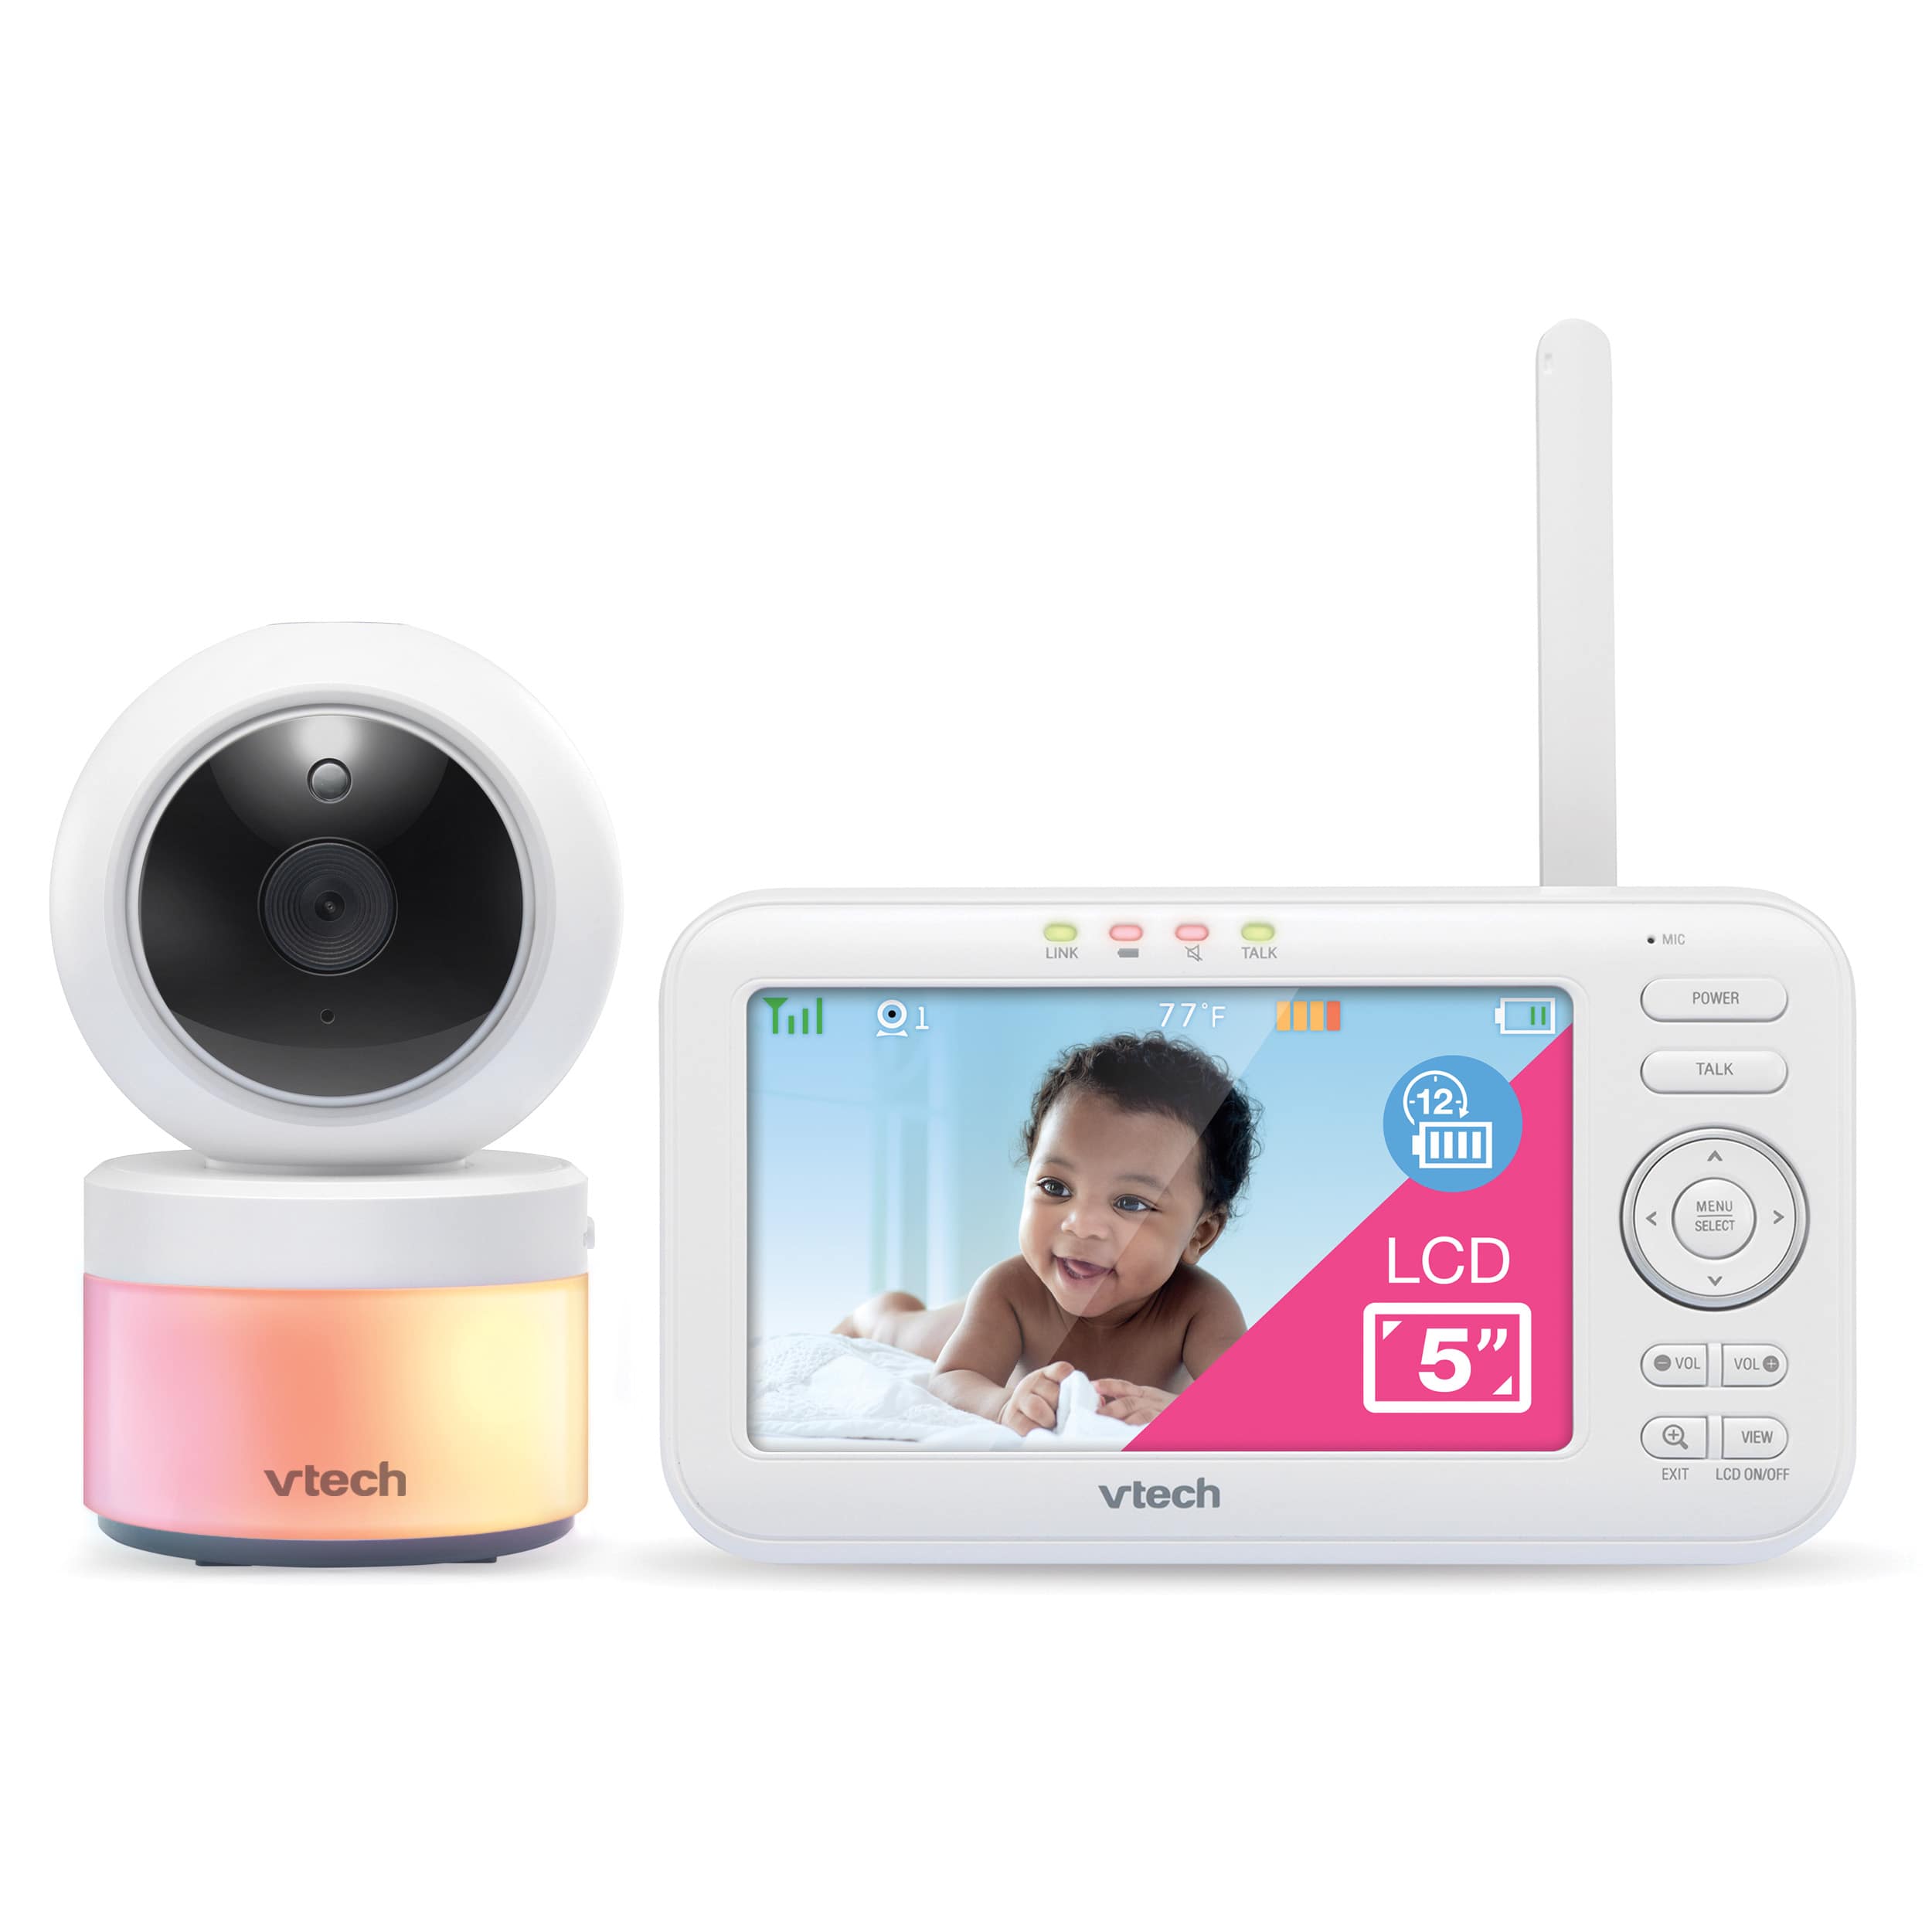 Why Won’t My Vtech Baby Monitor Turn On